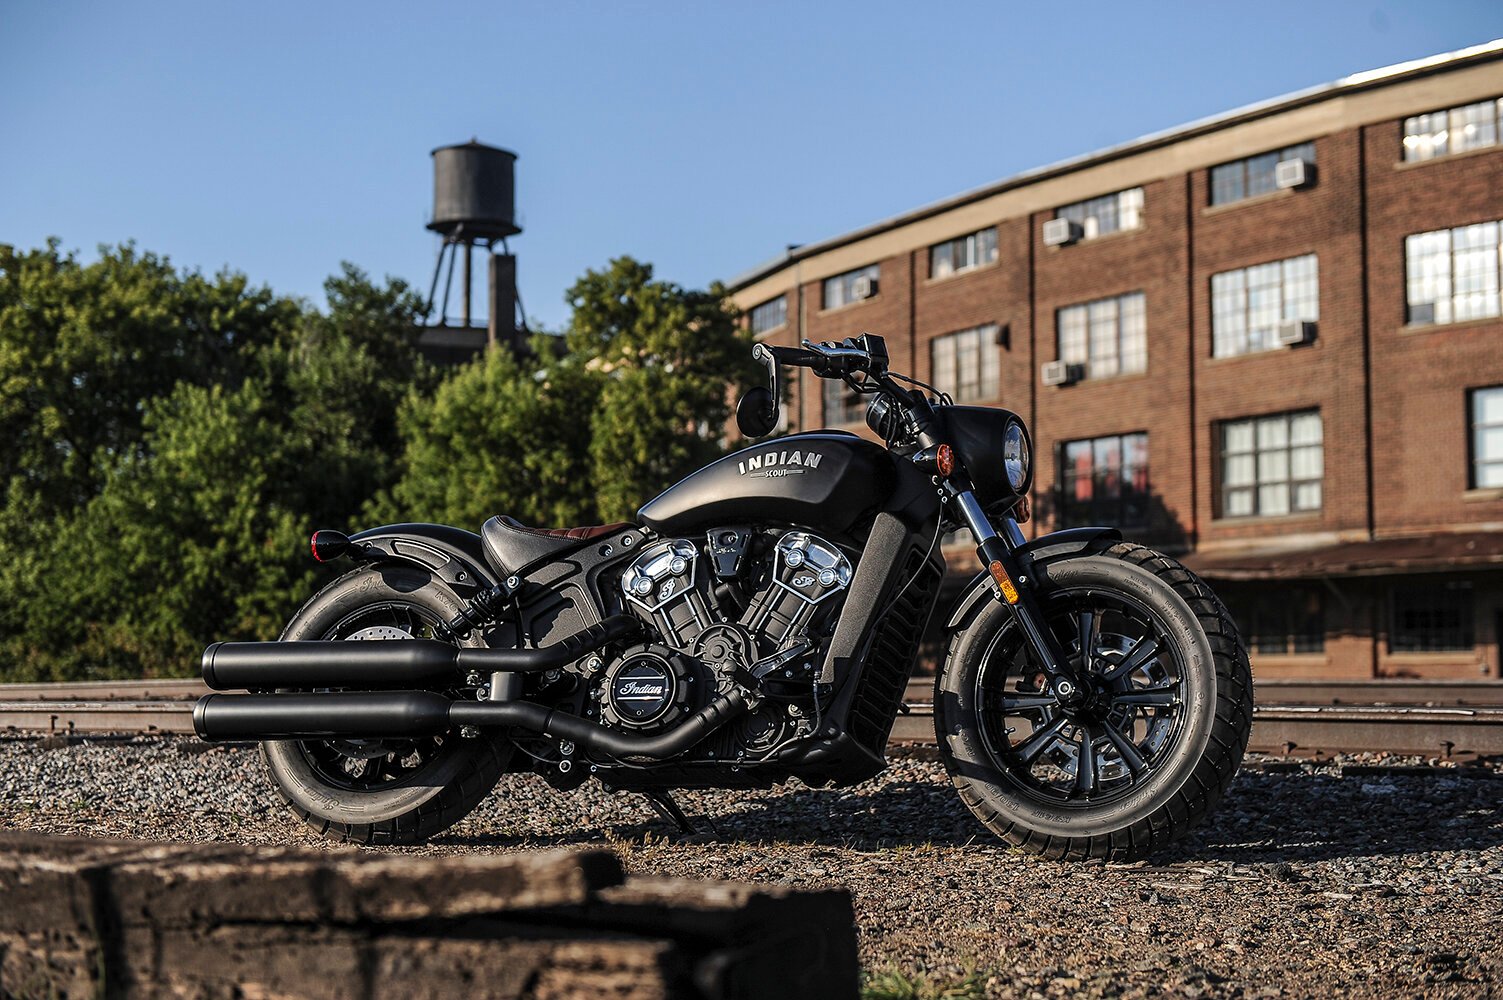 All black Indian Scout Bobber parked next to train tracks - a sleek and powerful motorcycle perfect for cruising through urban and rural landscapes